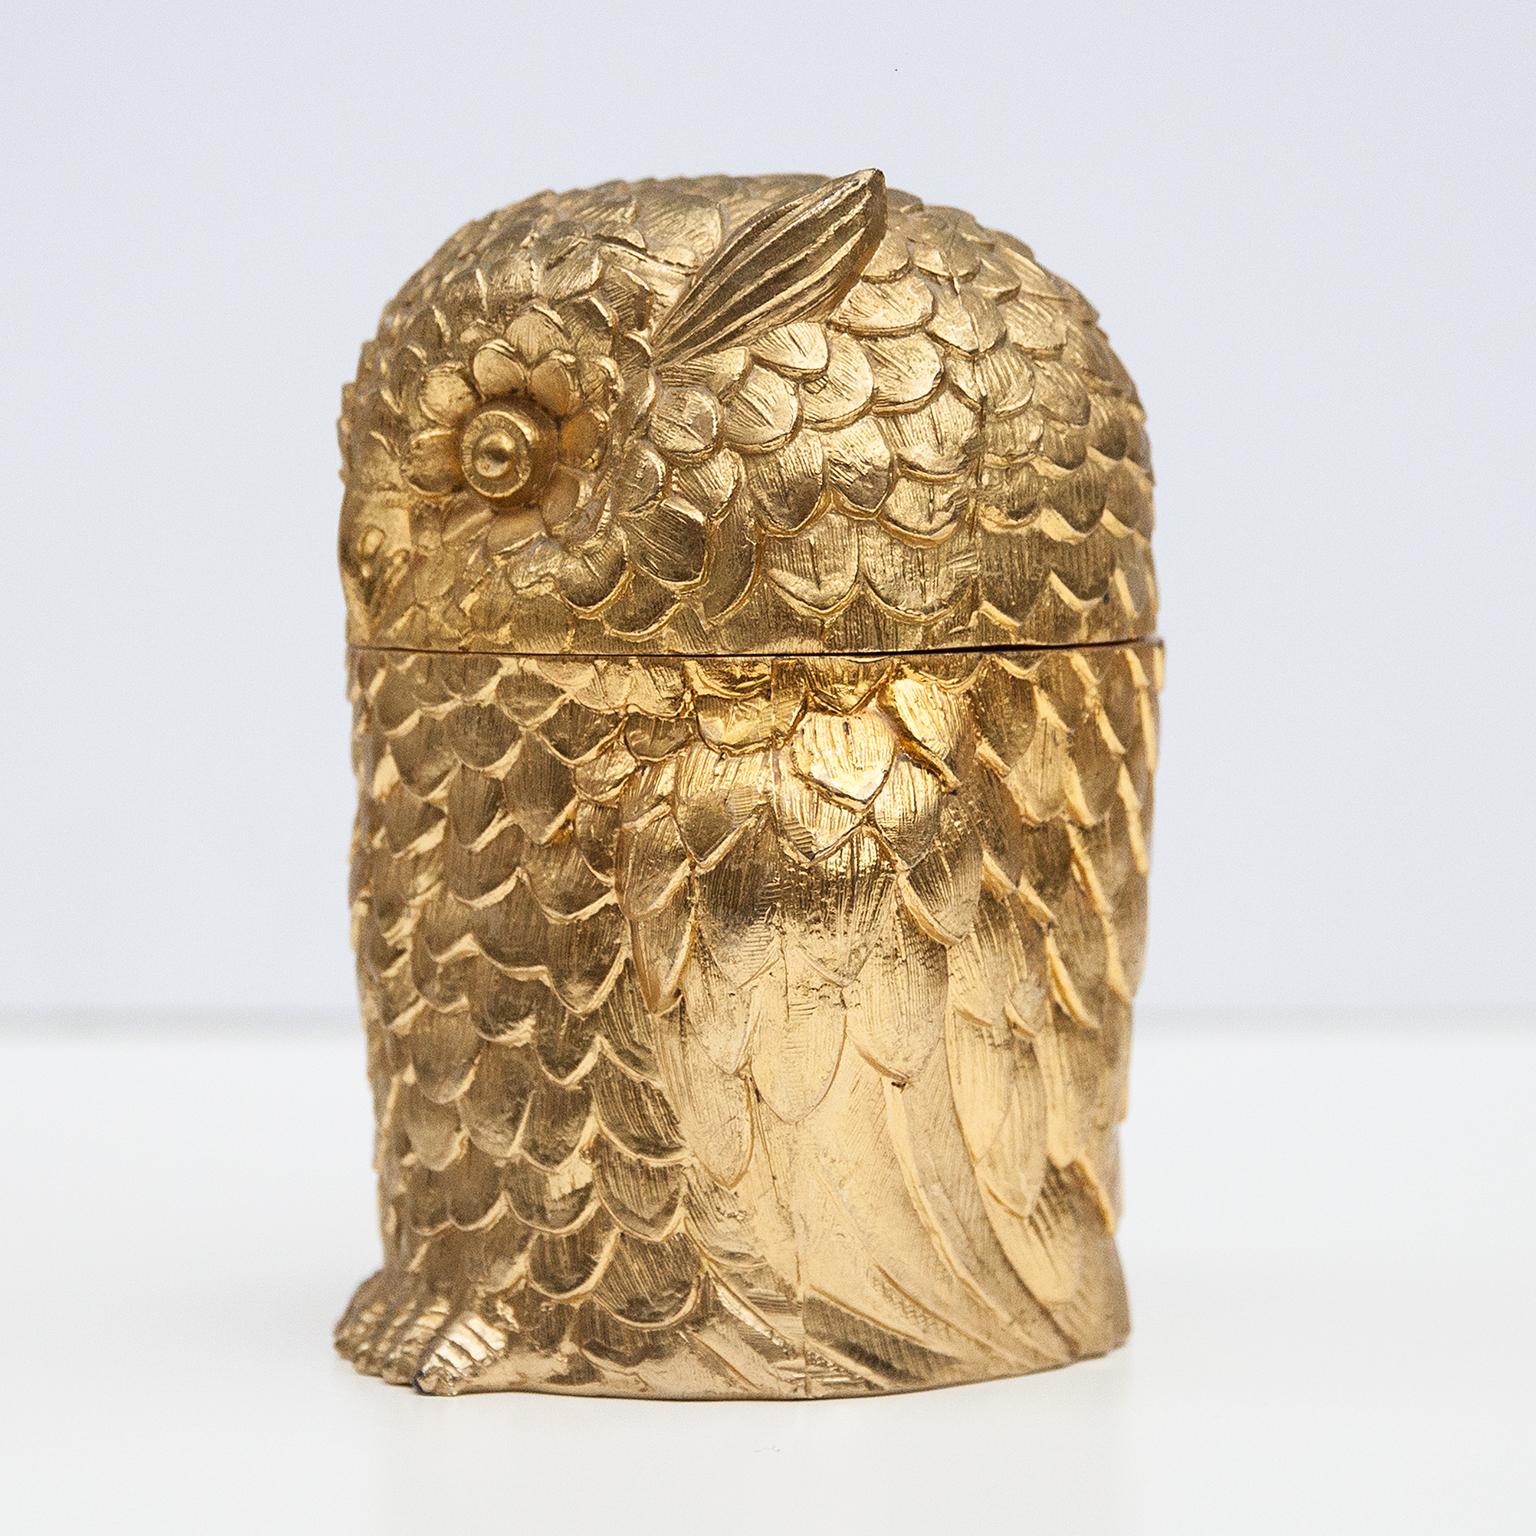 Gold plated Owl ice bucket with an metal inlay designed by Mauro Manetti, Italy 1970s. Marked on the base ” M/M” MADE IN ITALY”.
Nice shape and so useful for ice cubes and even ice cream or sorbet.